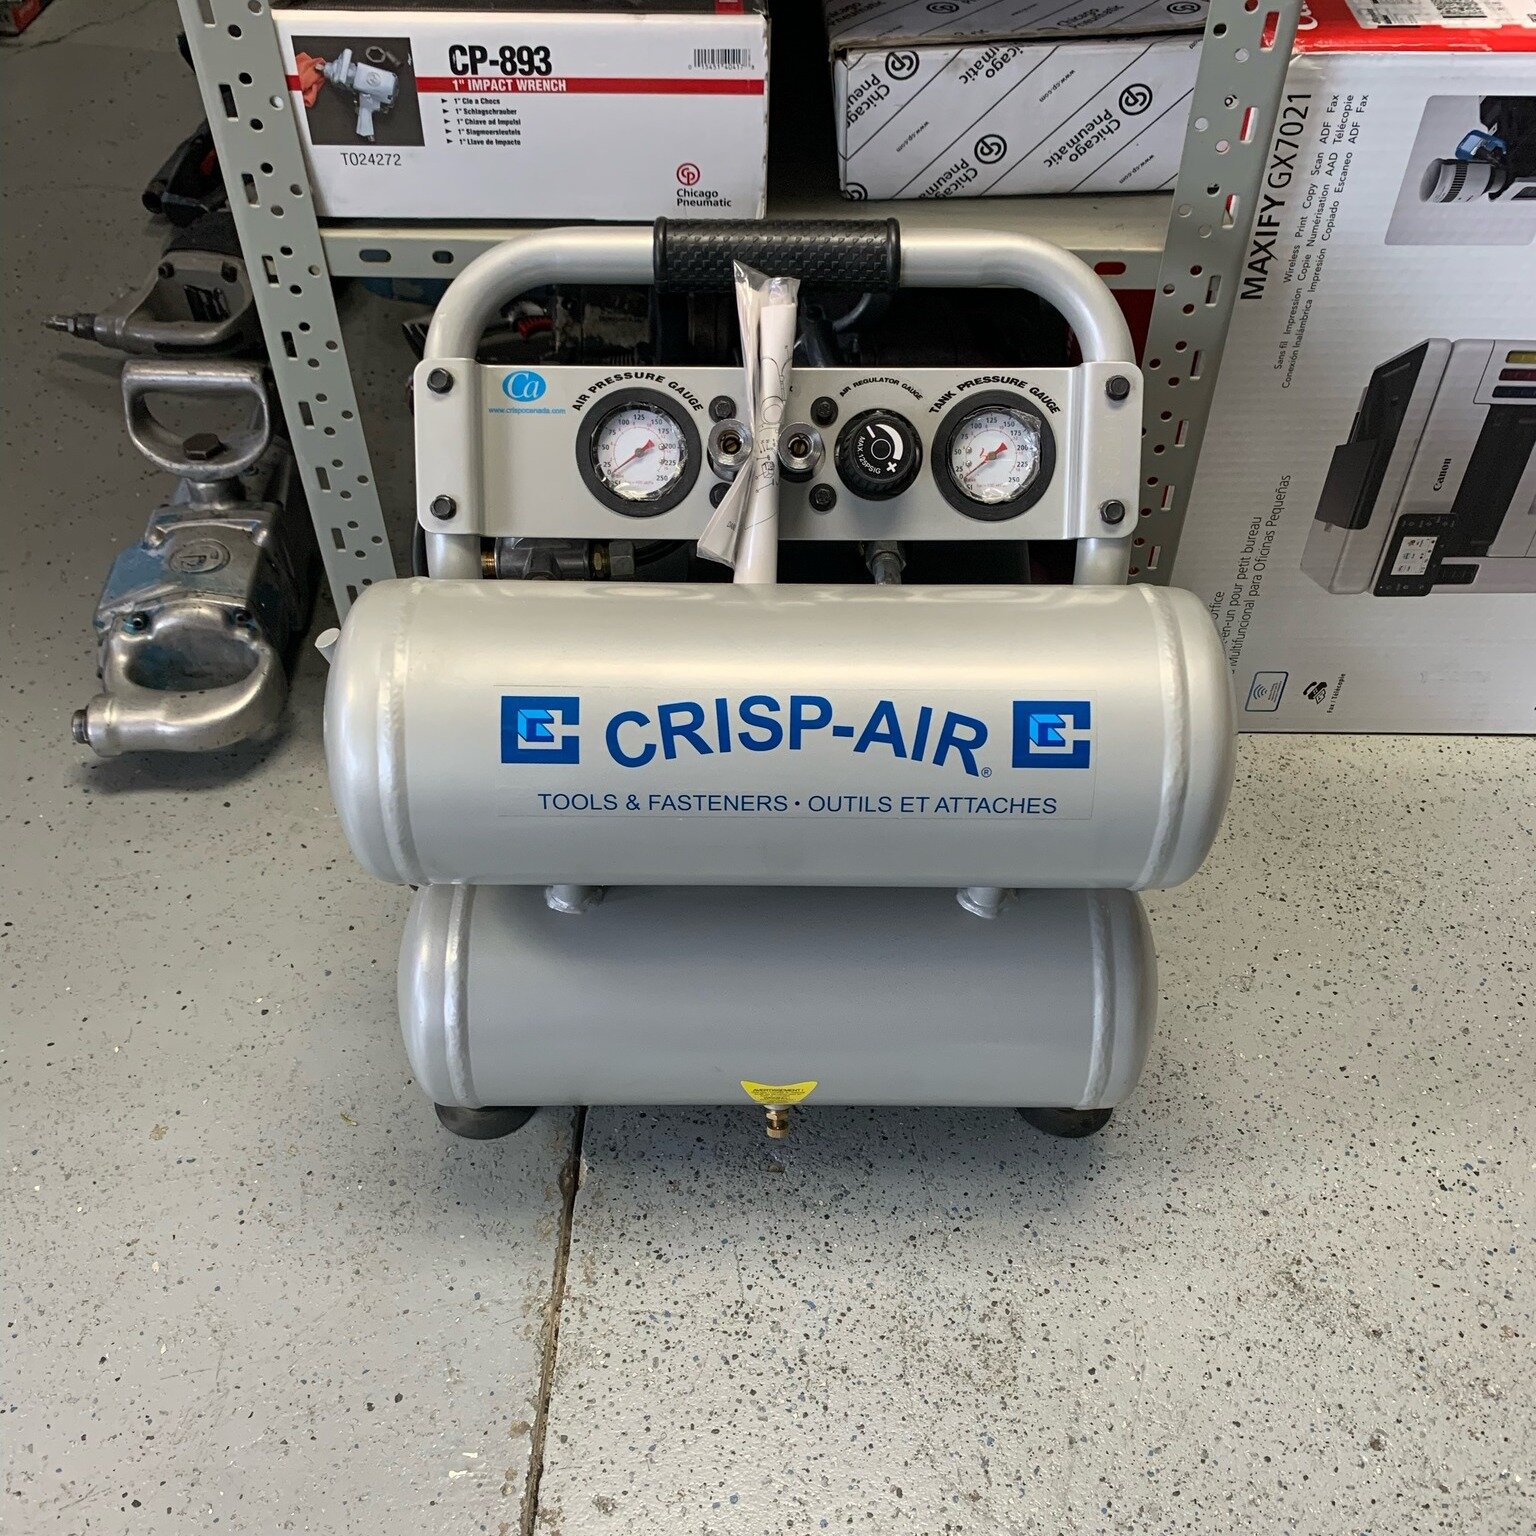 Check out this Crisp-Air Portable Twin-Stack Compressor...dm for pricing! (We have lots of deals)!

#aircompressor #airtoolshop #tooldeals